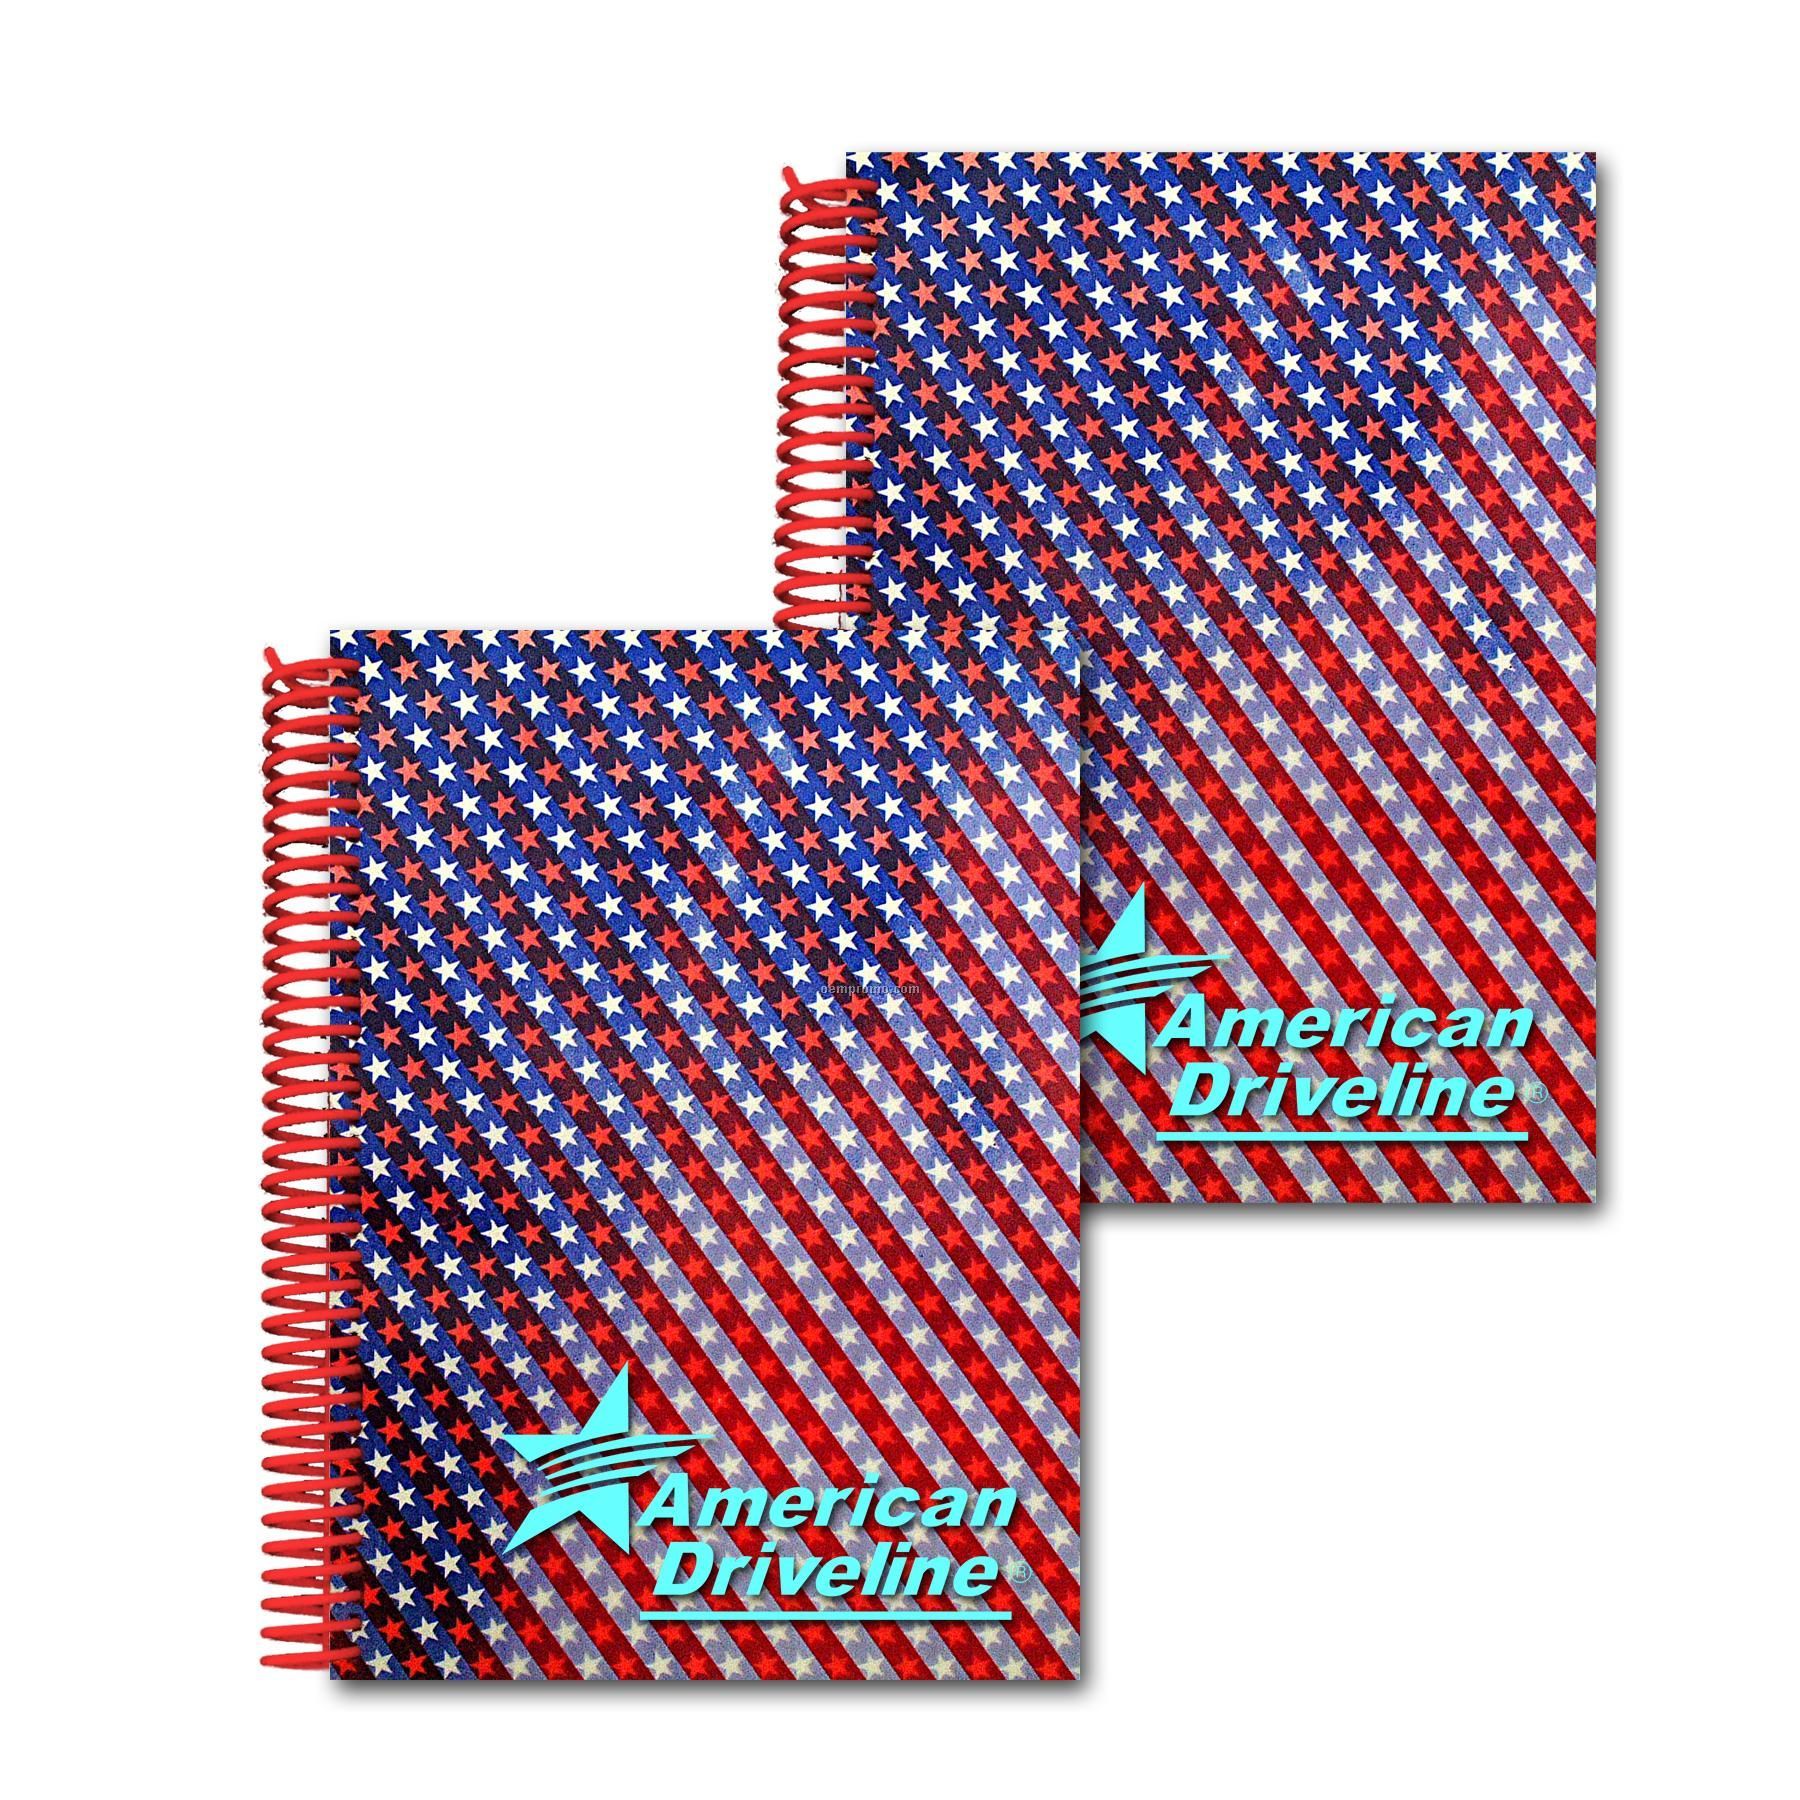 3d Lenticular Notebook Stock/Animated Stars And Stripes (Imprinted)